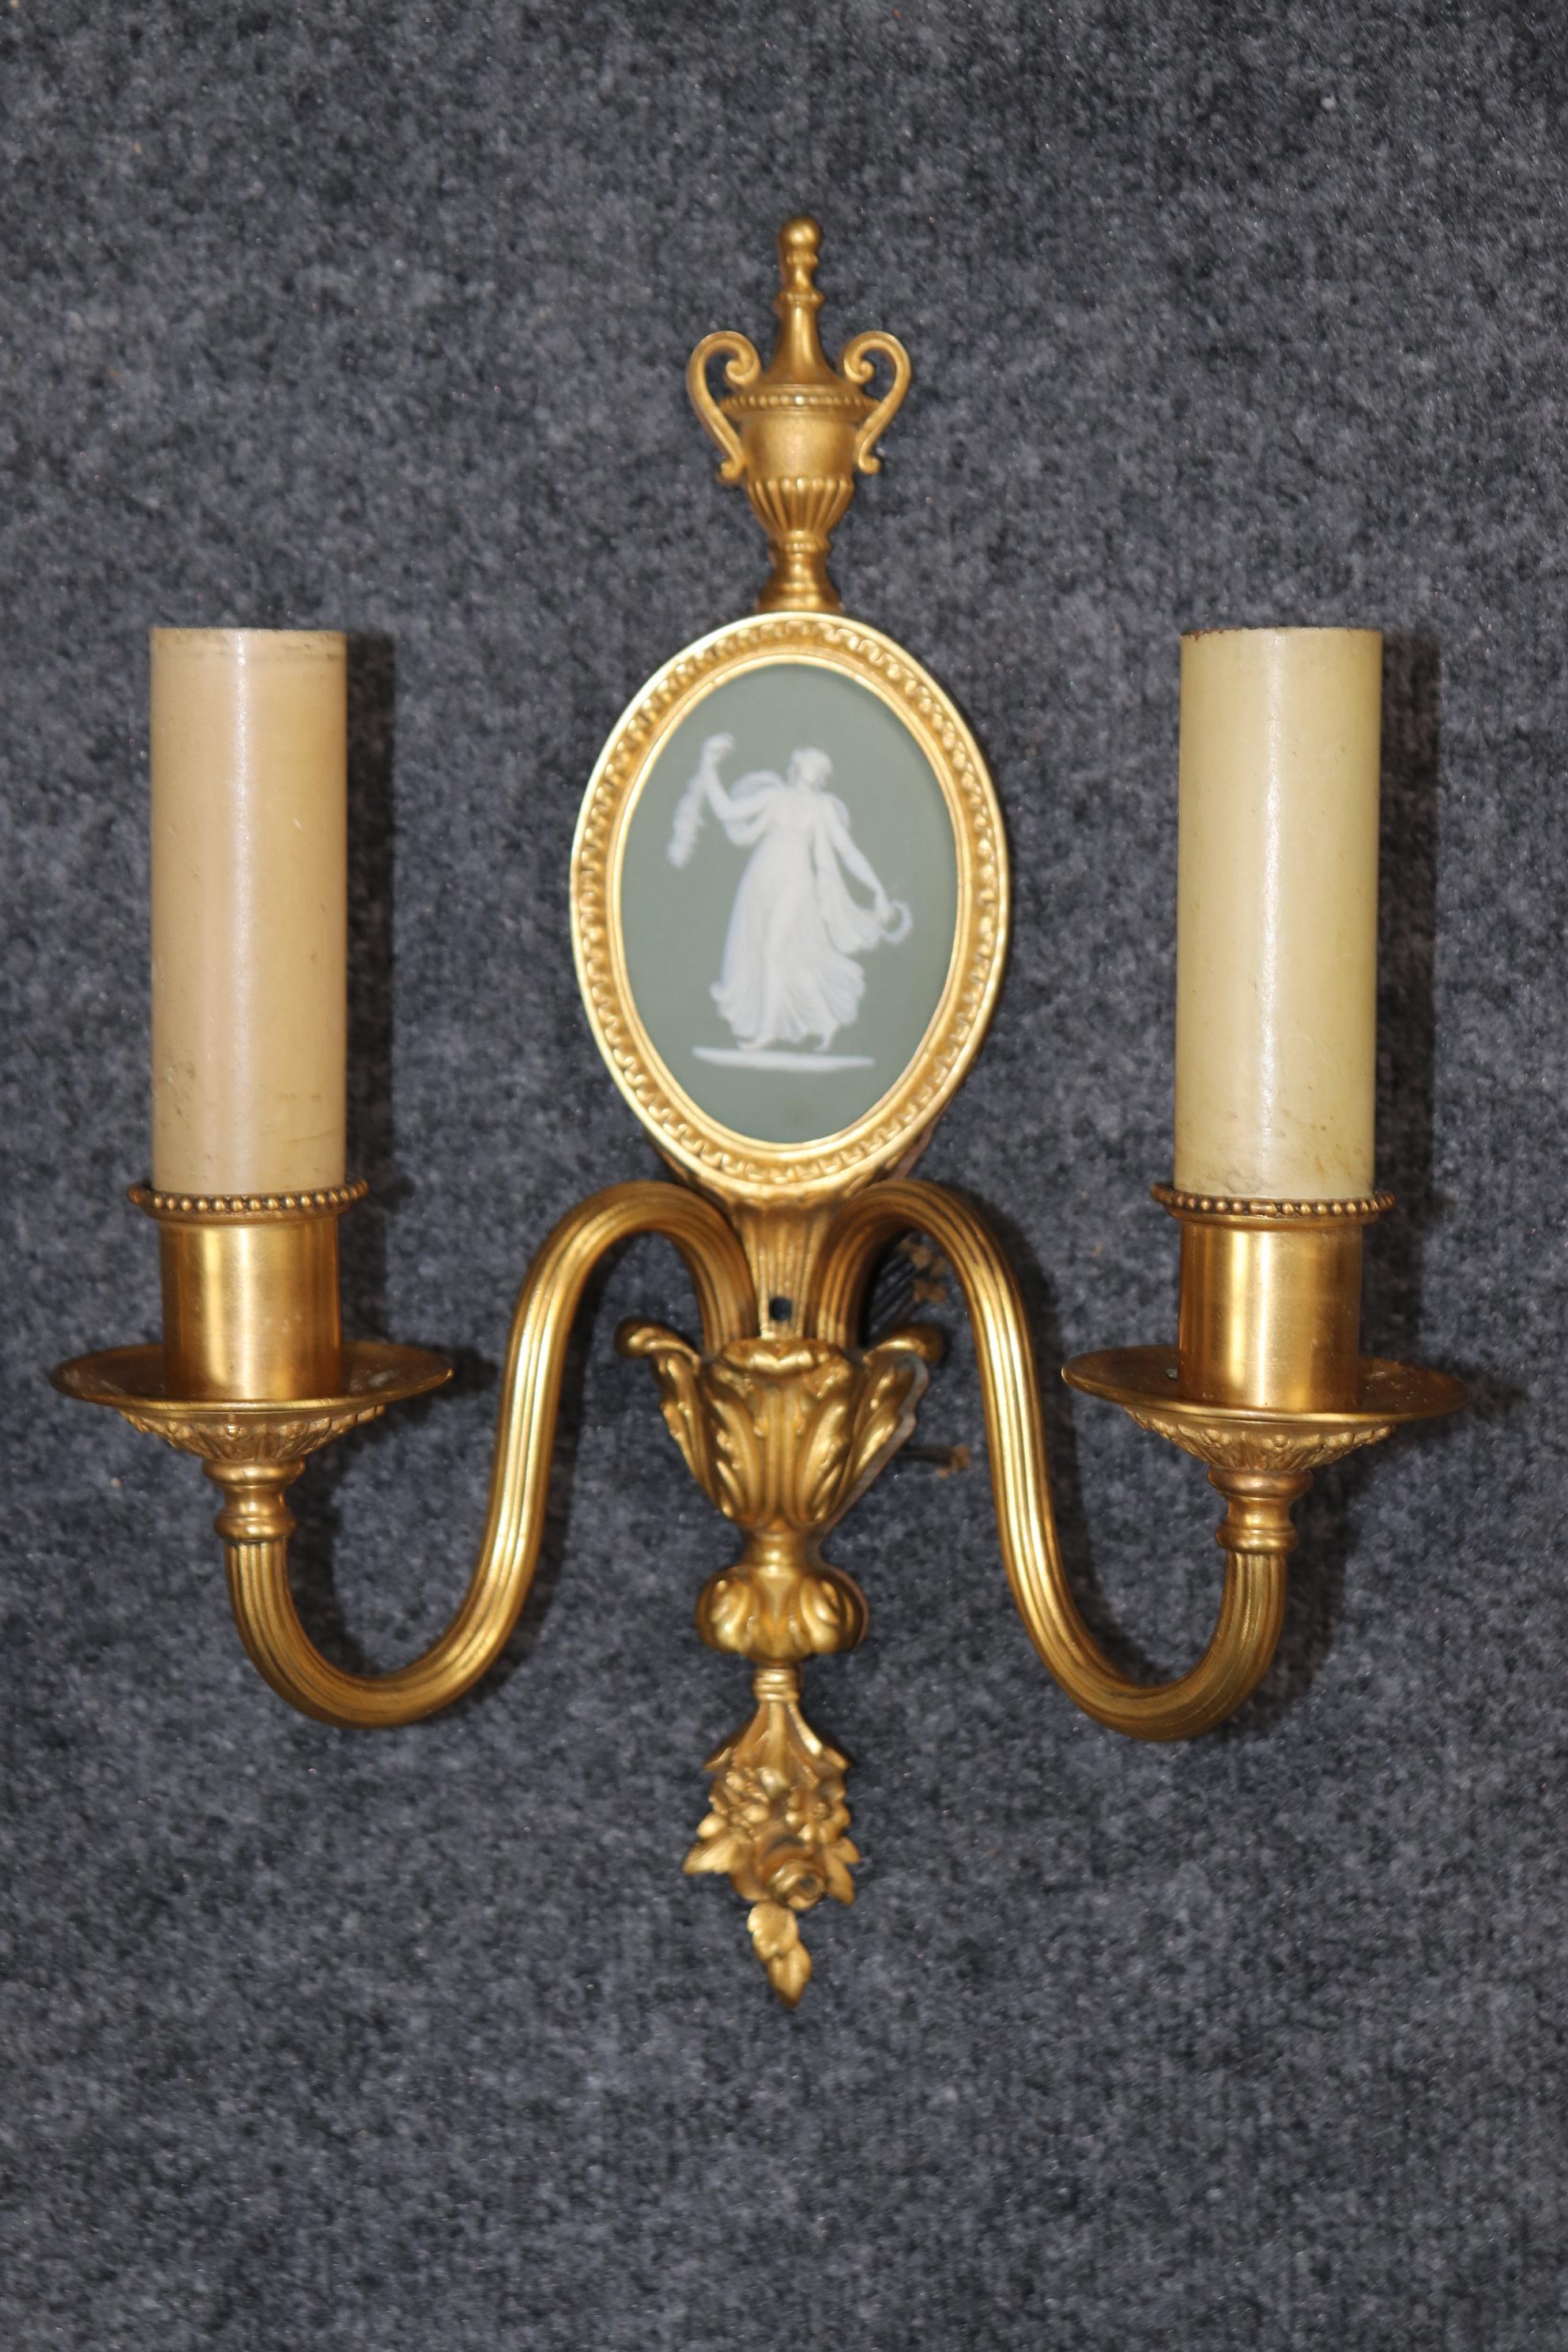 Cast Pair of 19th Century French Bronze Ormolu Sconces With English Wedgwood Plaques